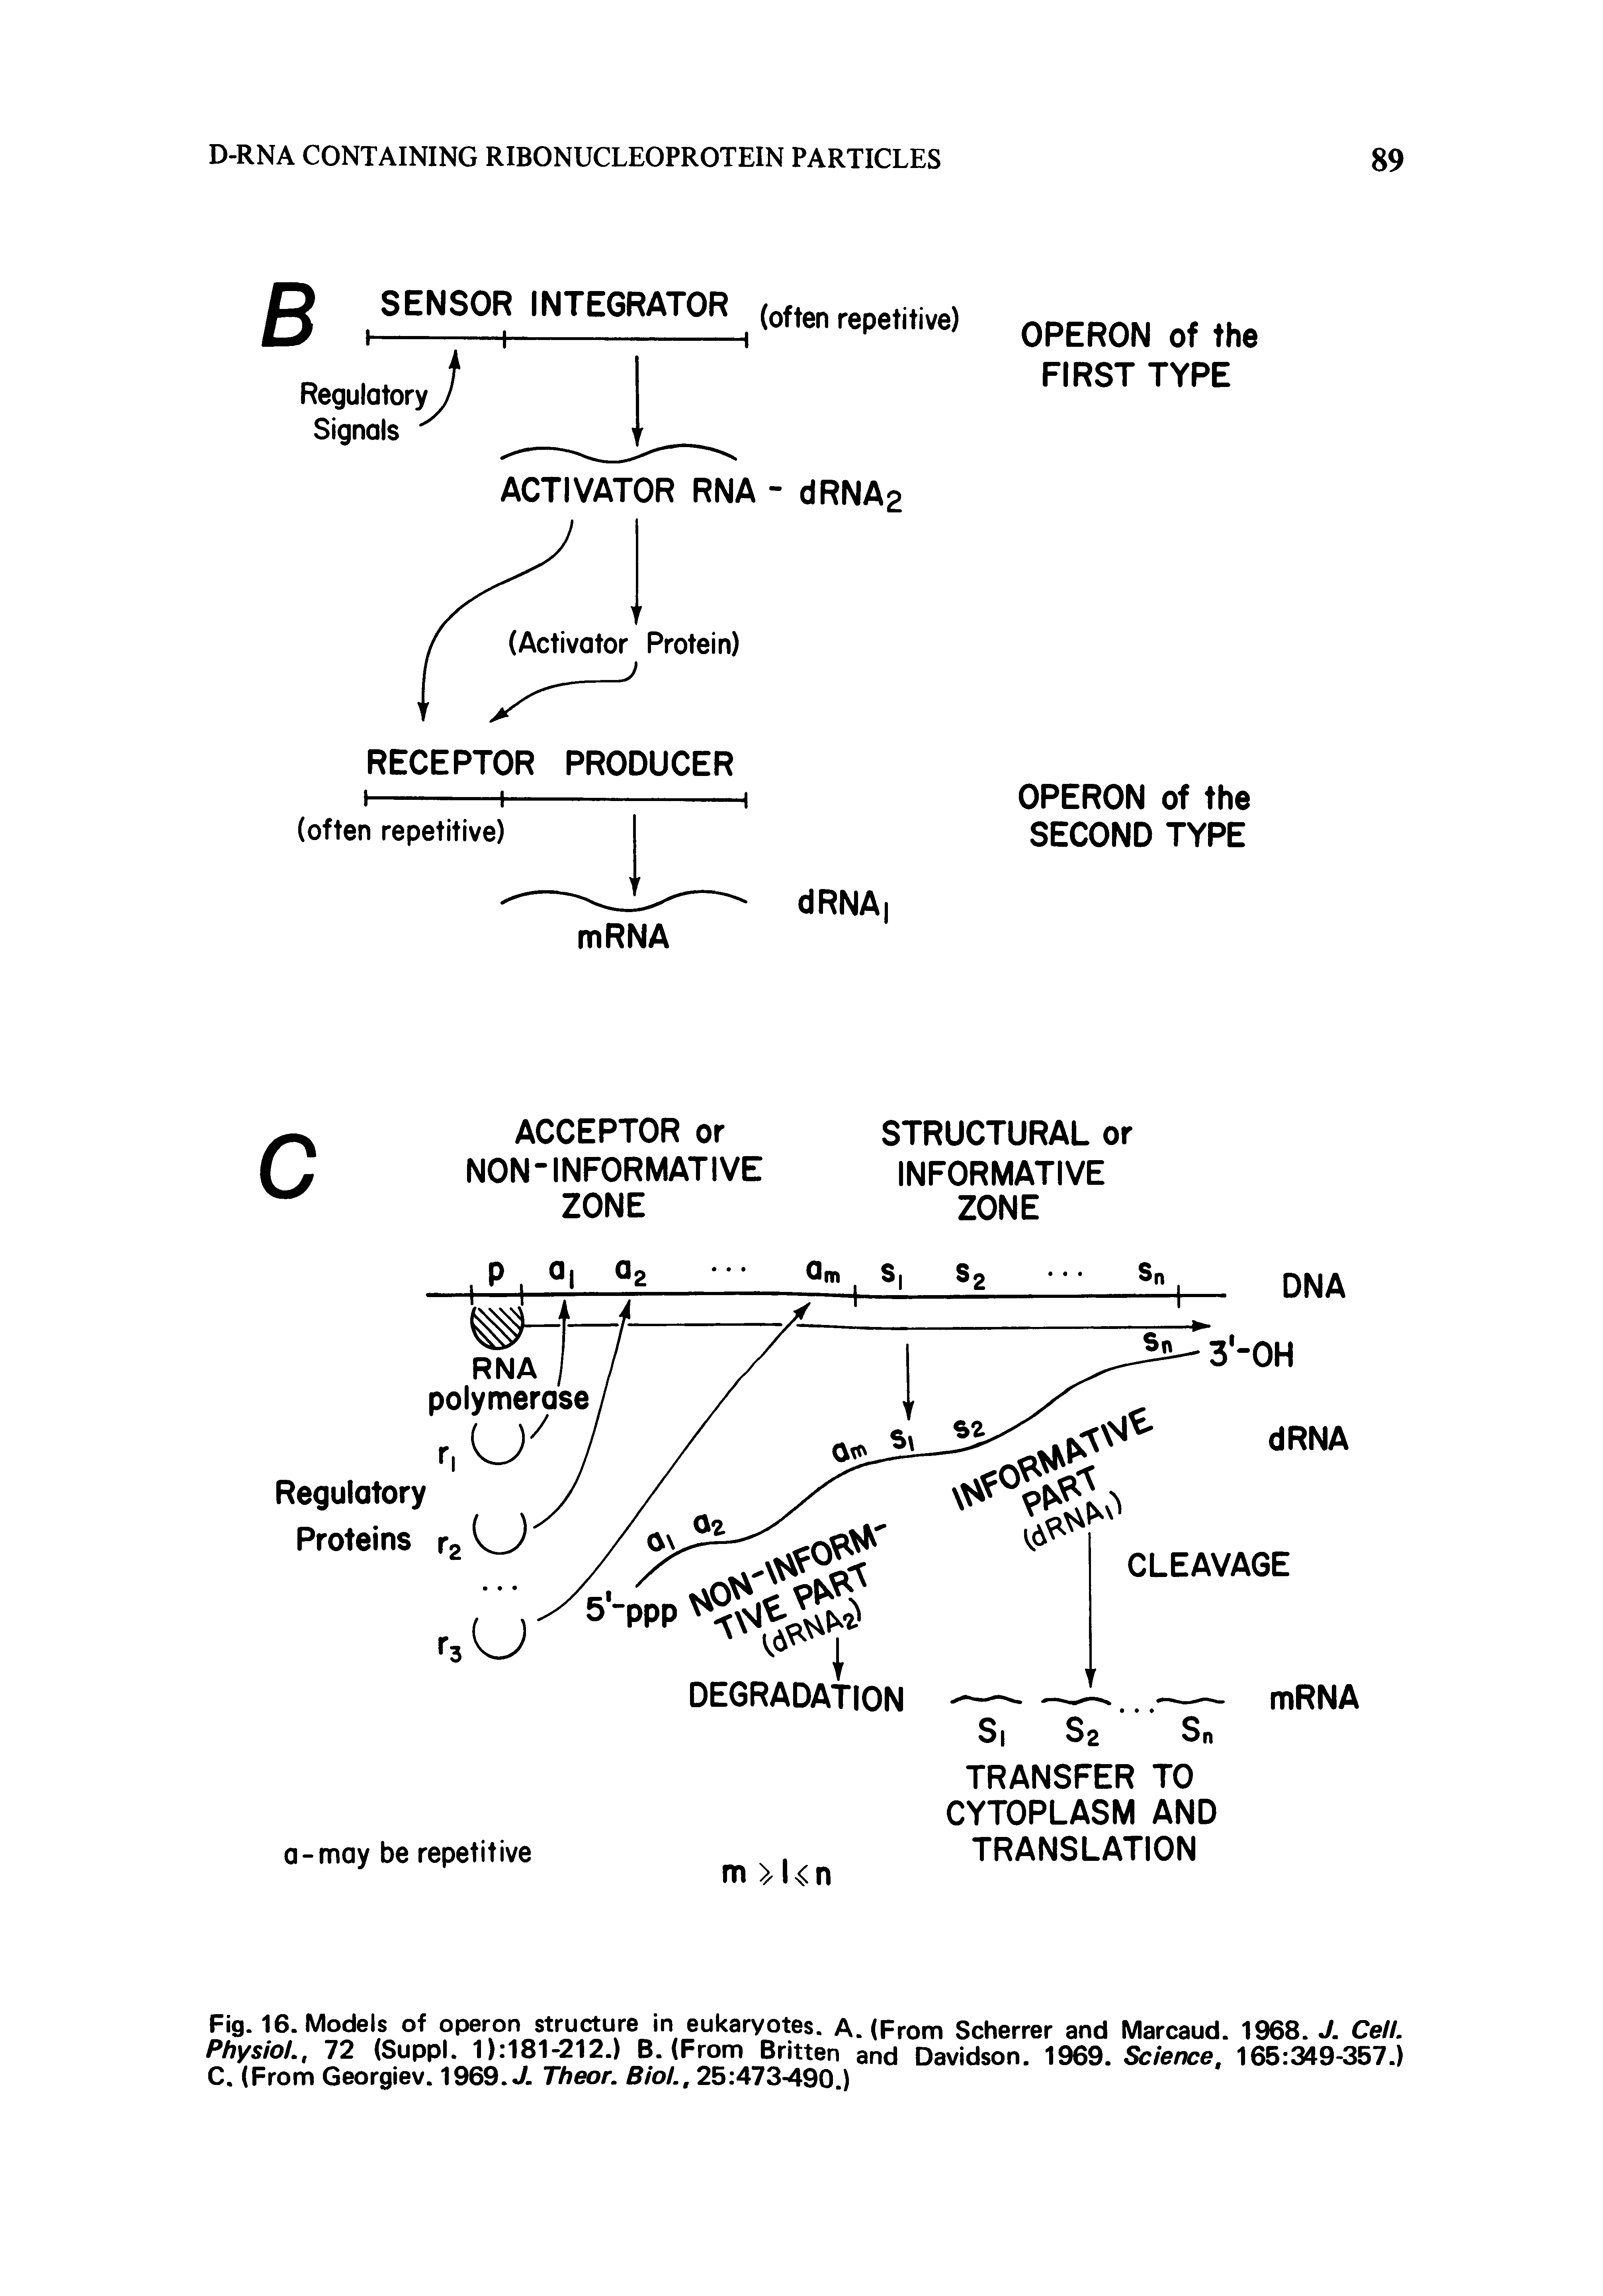 Fig. 16. Models of operon structure in eukaryotes. A. (From Scherrer and Marcaud. 1968. J. Cell. Physio ., 72 (Suppl. 1) 181-212.) B. (From Britten and Davidson. 1969. Sb/e/ice, 165 349-357.) C. (From Georgiev. 1969. J. Theor. S/o/., 25 473-490.)...